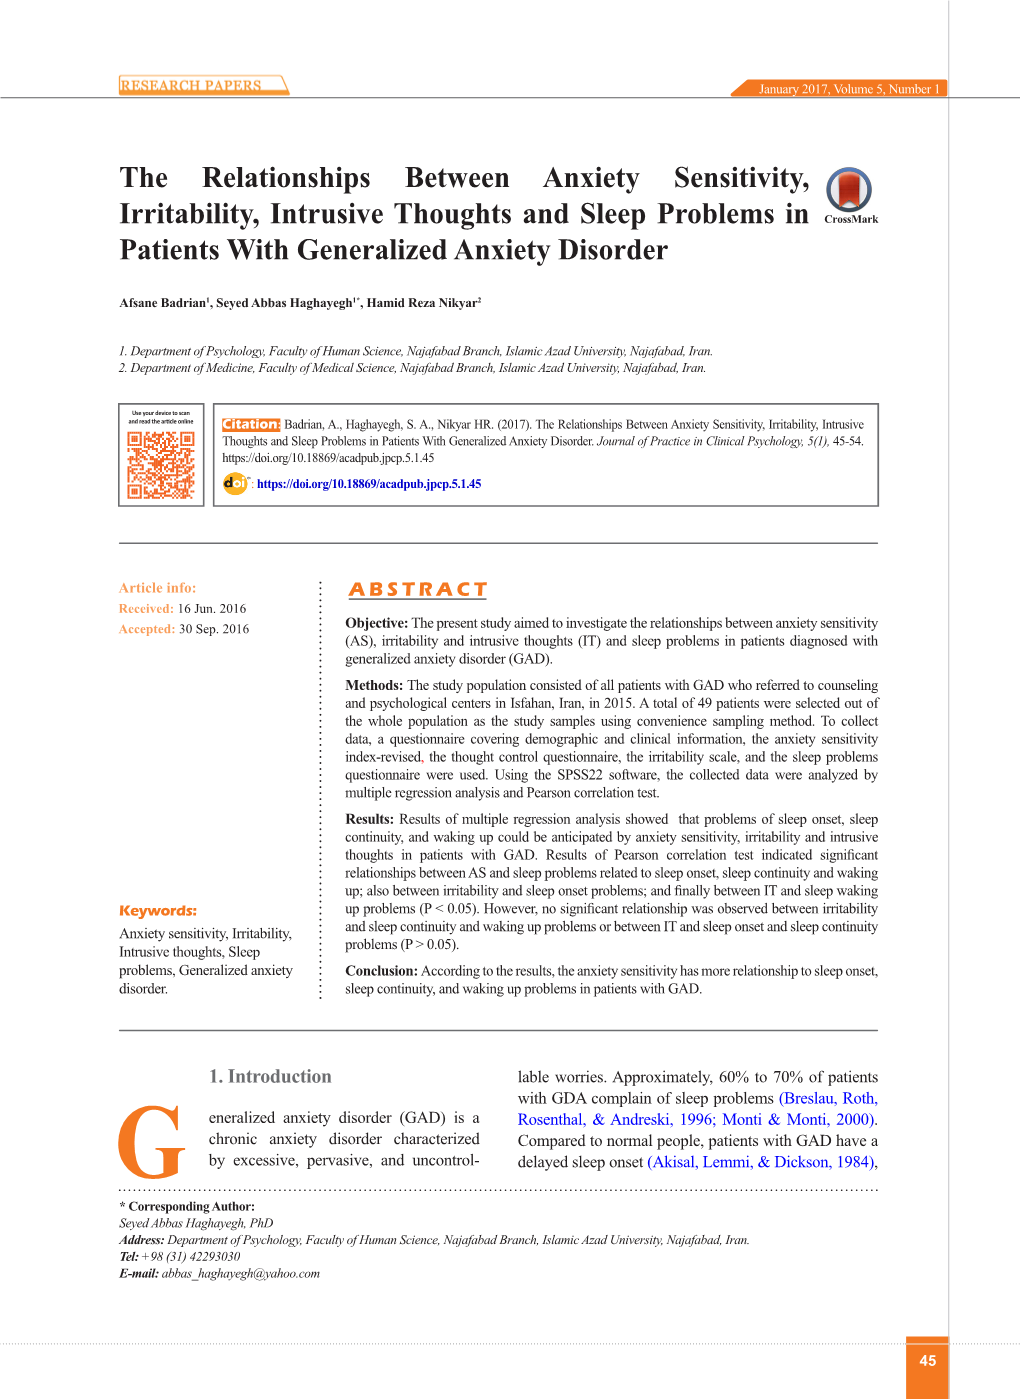 The Relationships Between Anxiety Sensitivity, Irritability, Intrusive Thoughts and Sleep Problems in Patients with Generalized Anxiety Disorder